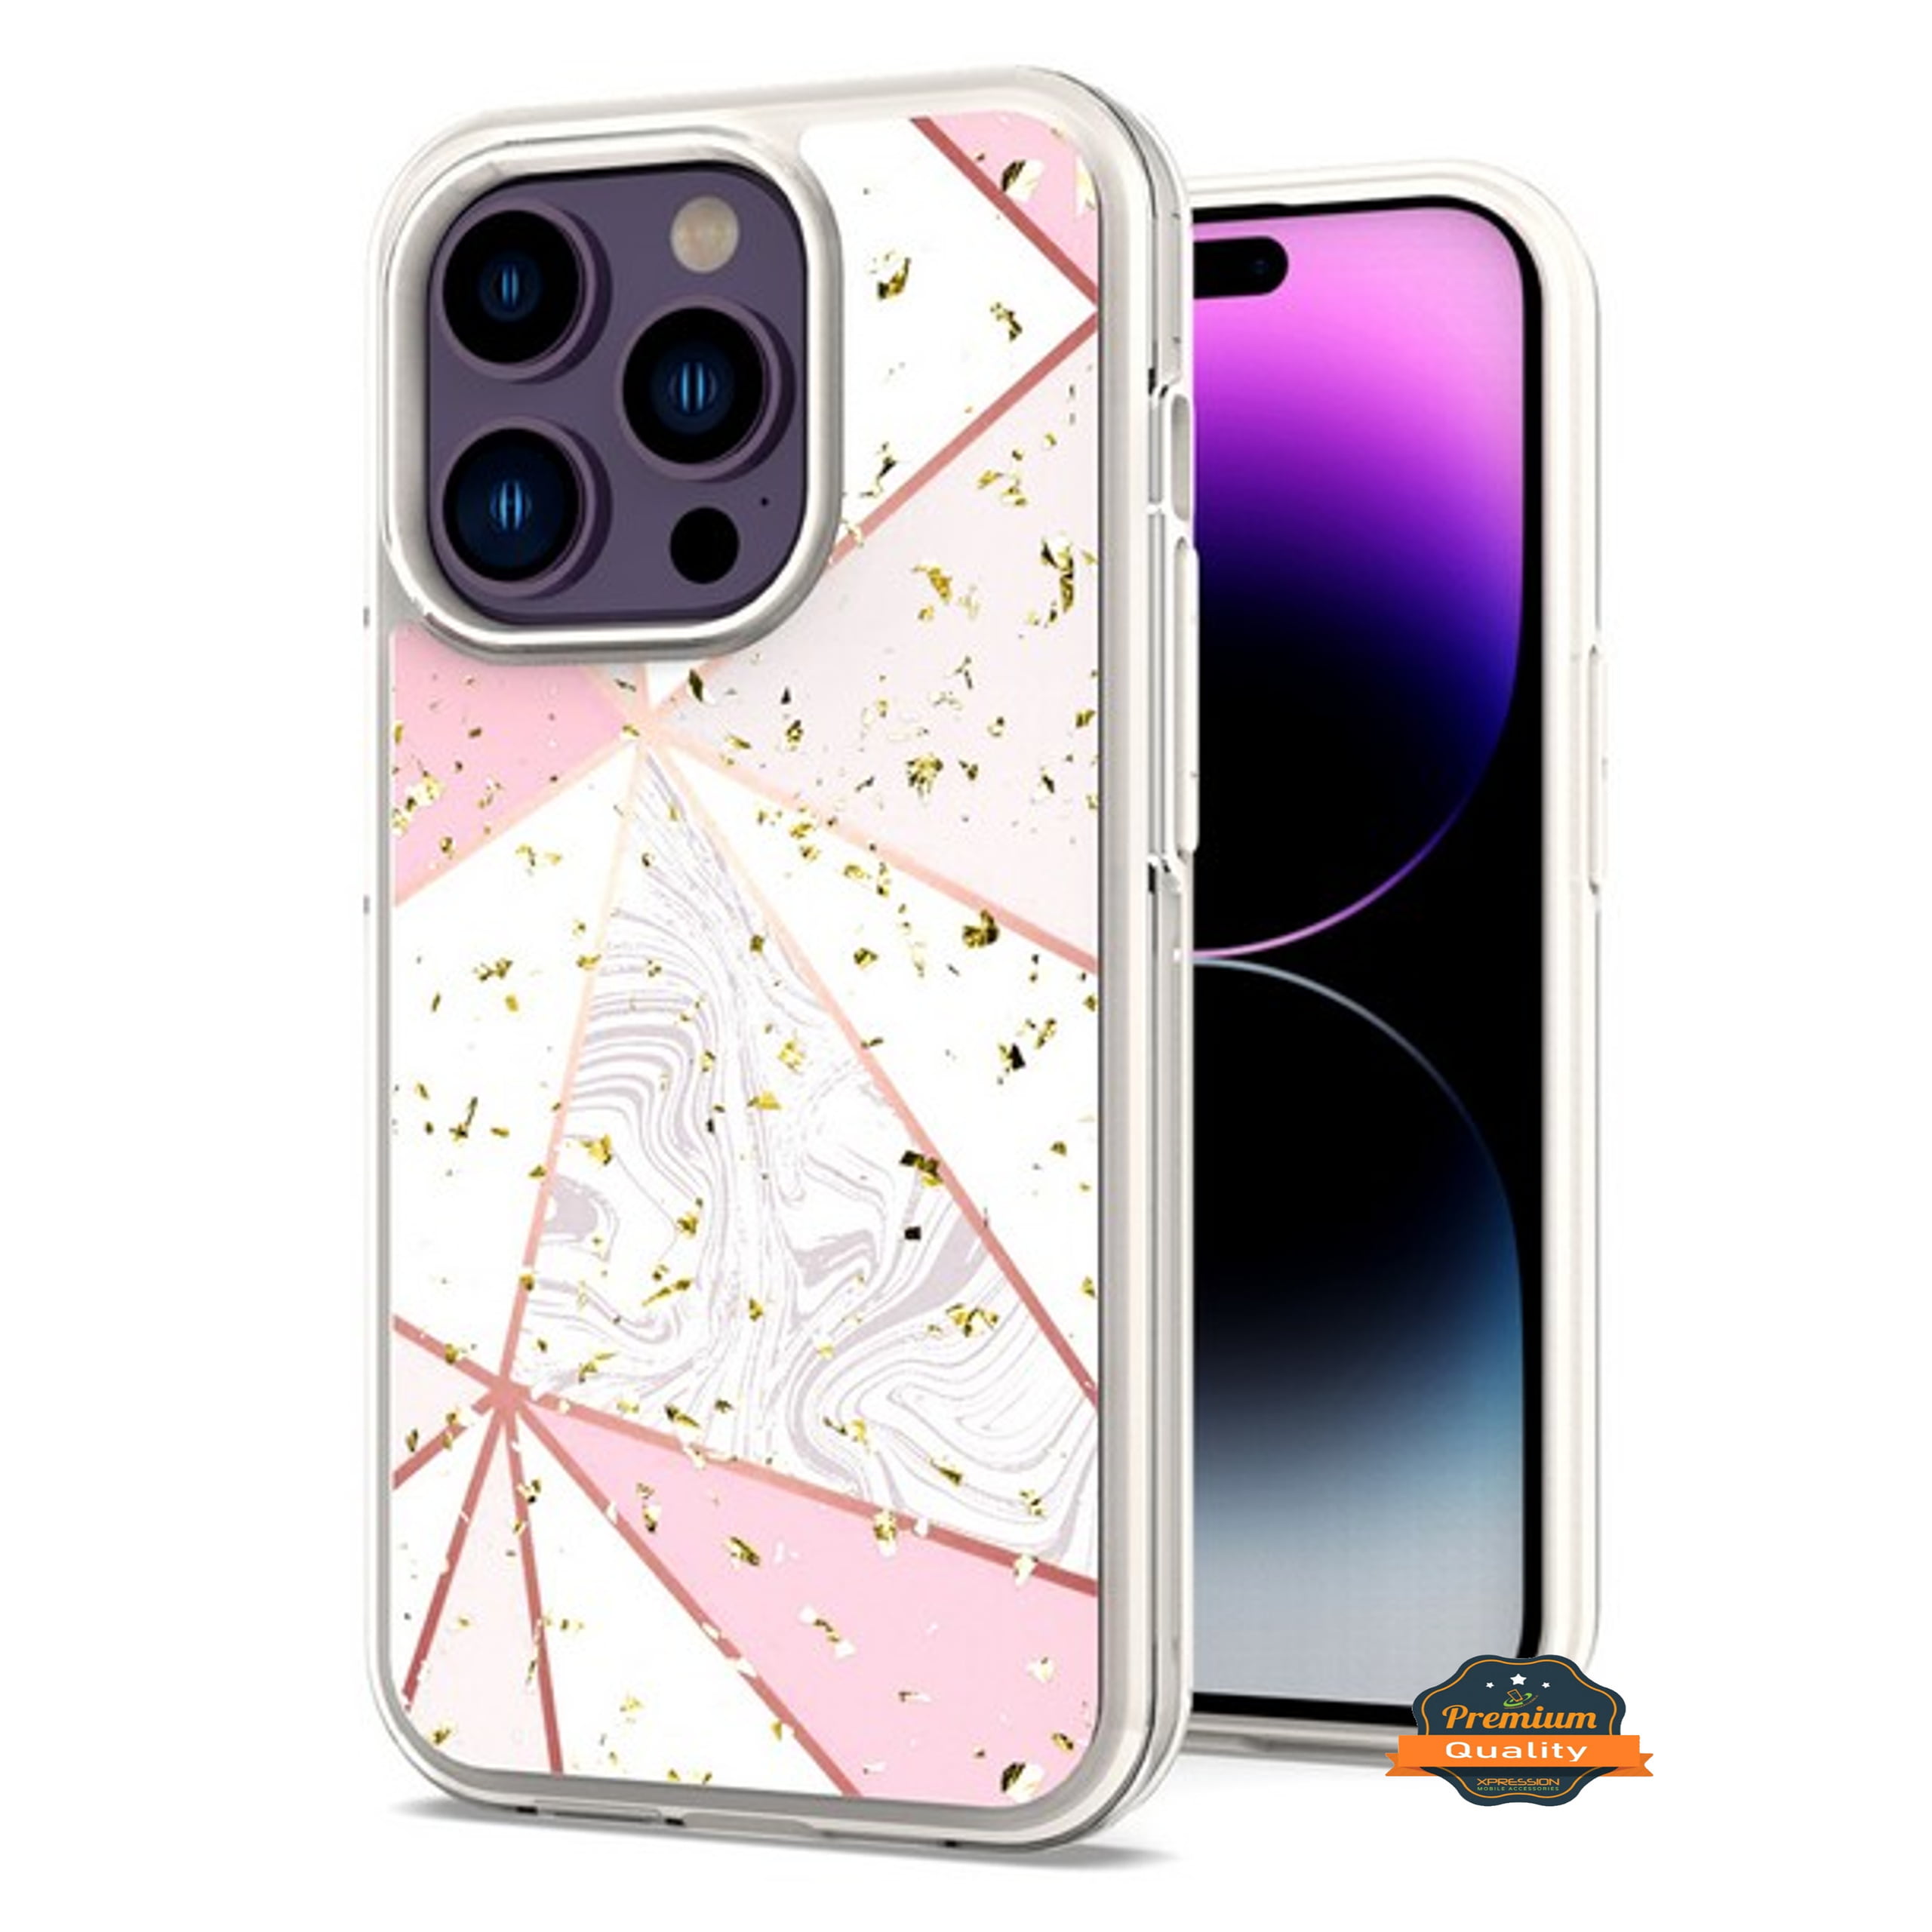 Hasaky Case for iPhone 14 Case,iPhone 13 Case 6.1 Inch,Dual Layer Hybrid  Bumper Cute Women Girls Sparkly Glitter Pink Marble Soft TPU + Hard Back